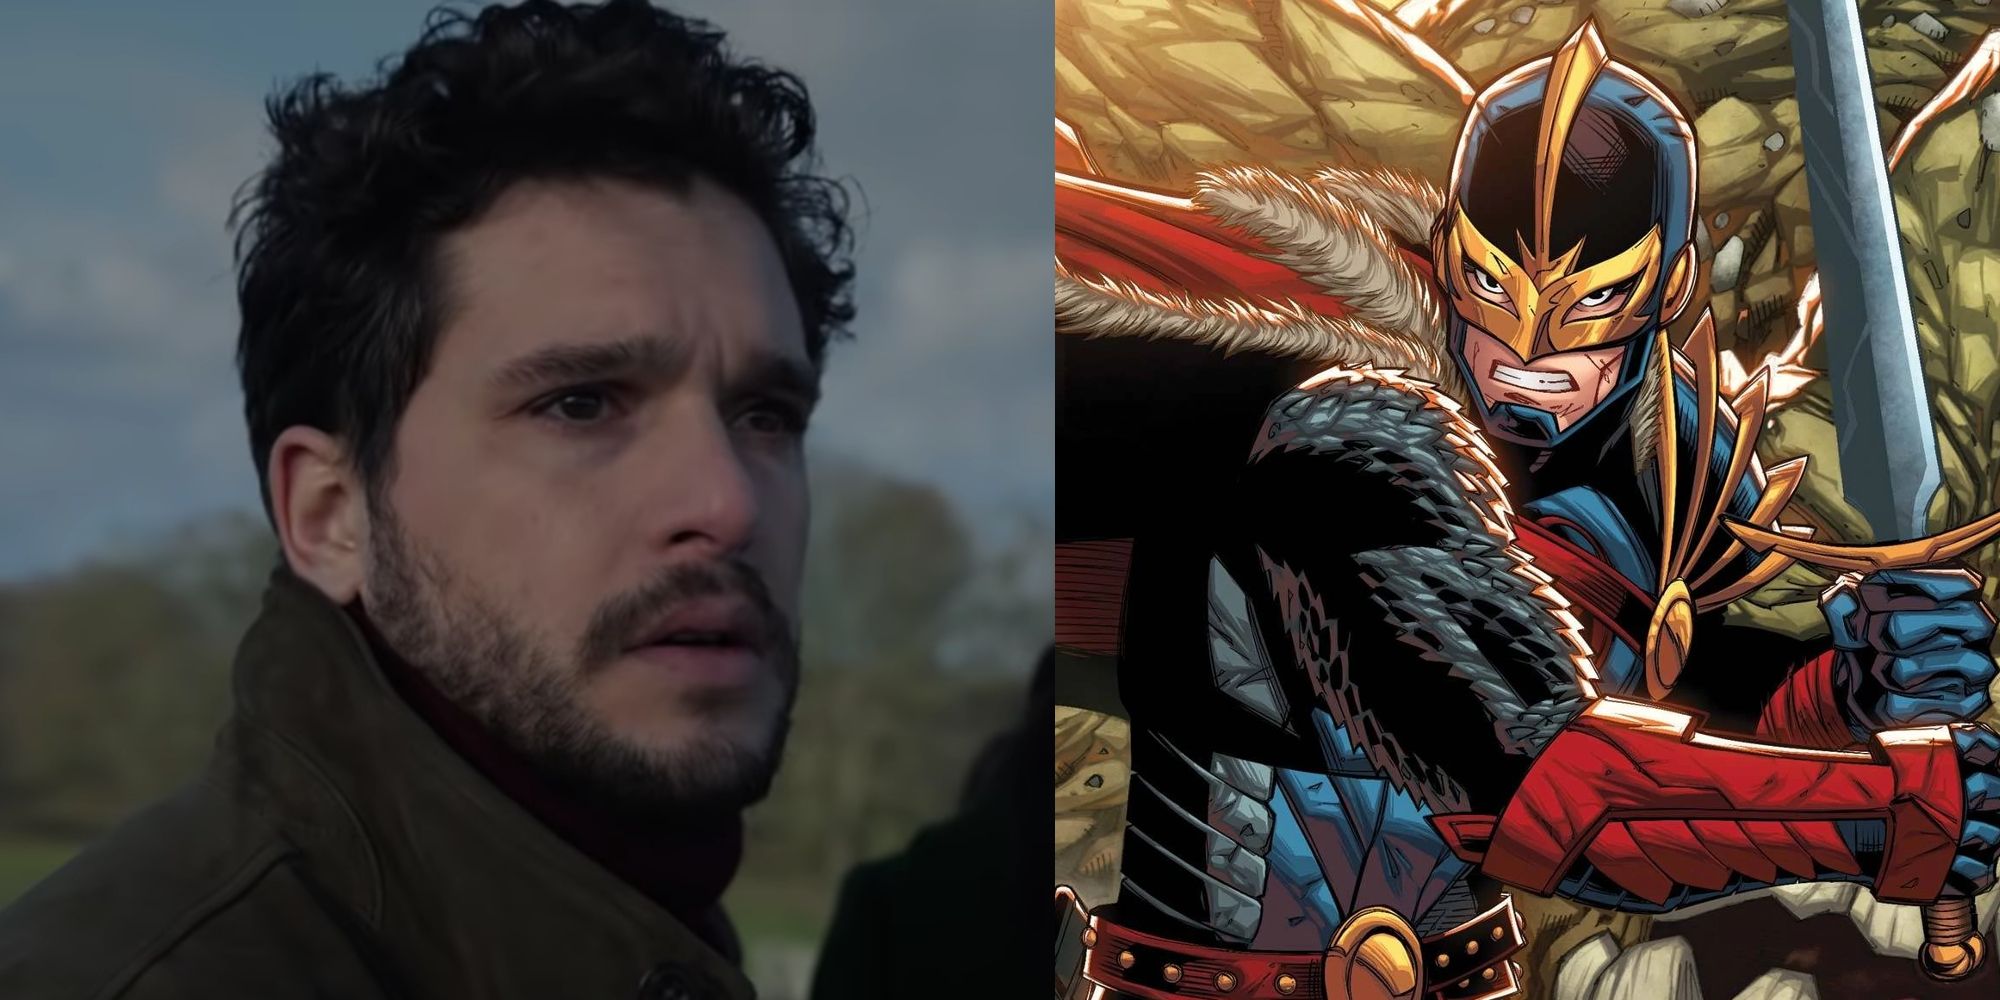 Dane Whitman played by Kit Harington in Eternals; Black Knight wielding the Ebony Blade in the comics